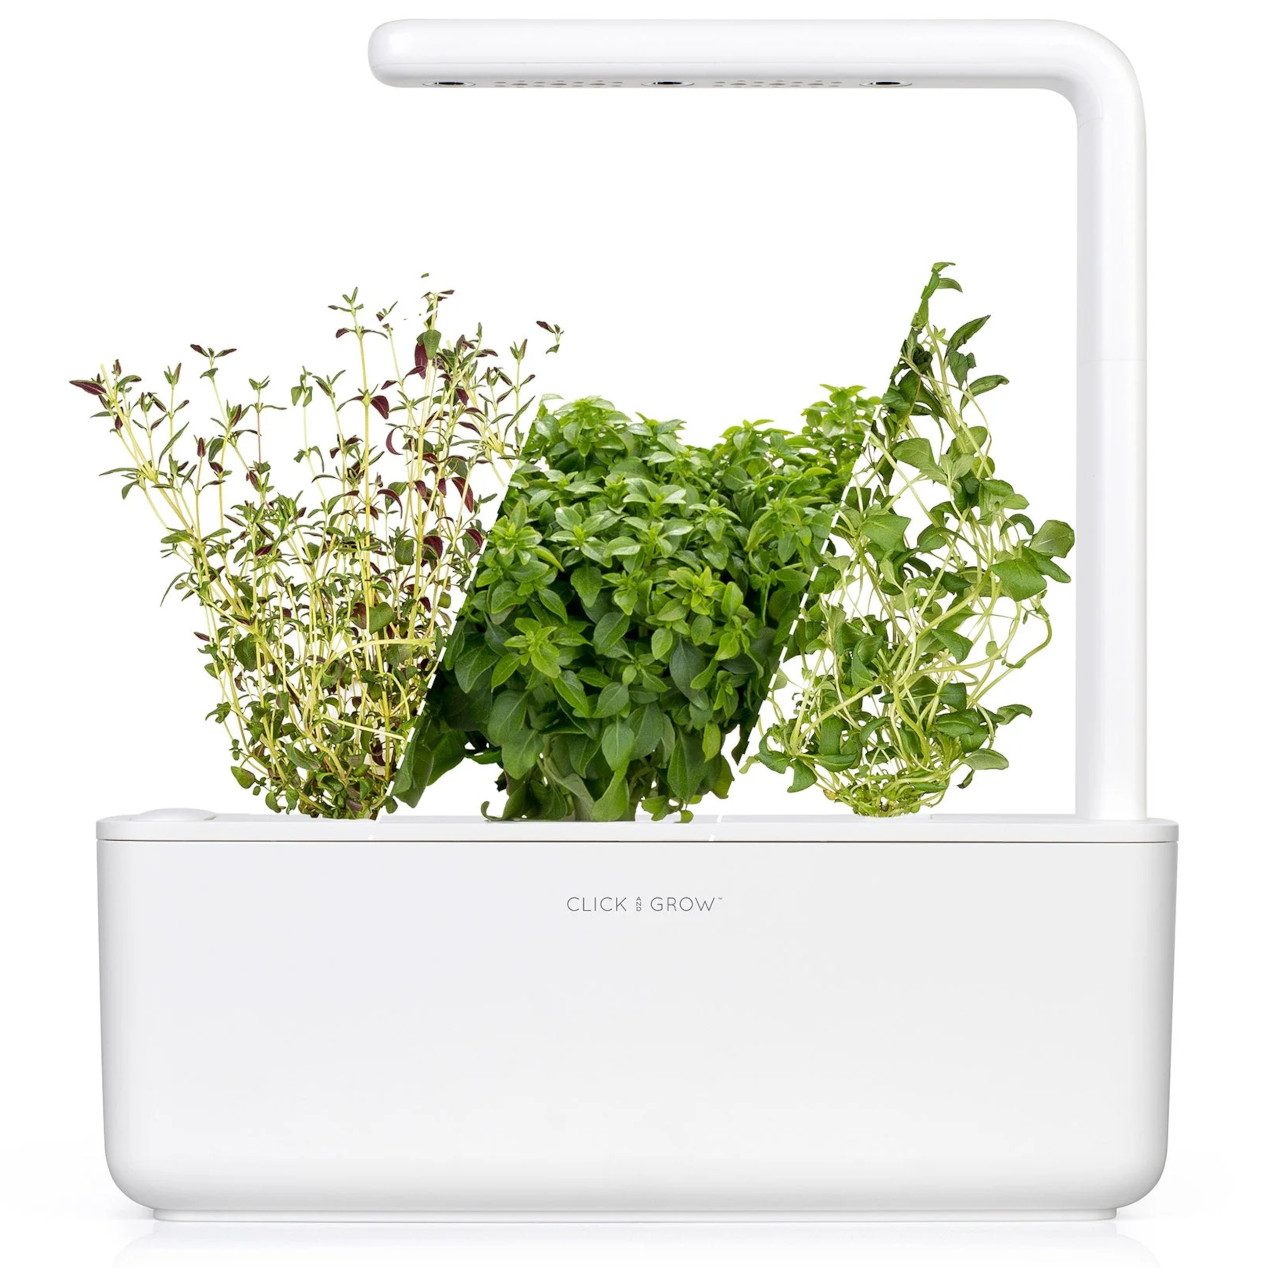 Click & Grow -  Smart Garden 3 with Italian Herb Kit with Grow Light and 12 Plant Pods